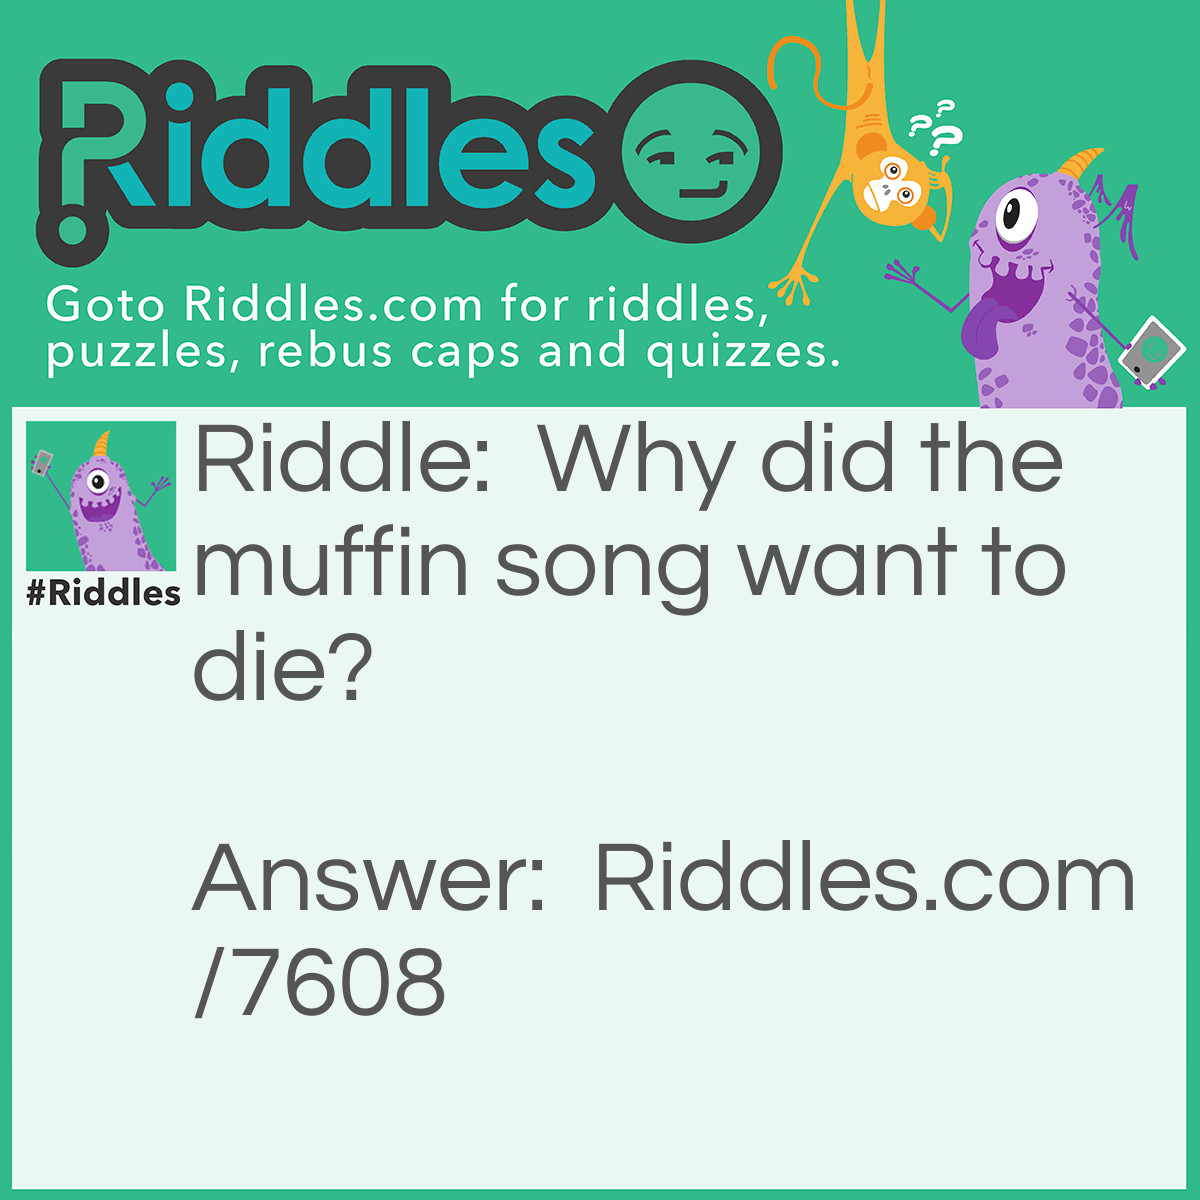 Riddle: Why did the muffin song want to die? Answer: Muffin is a food.